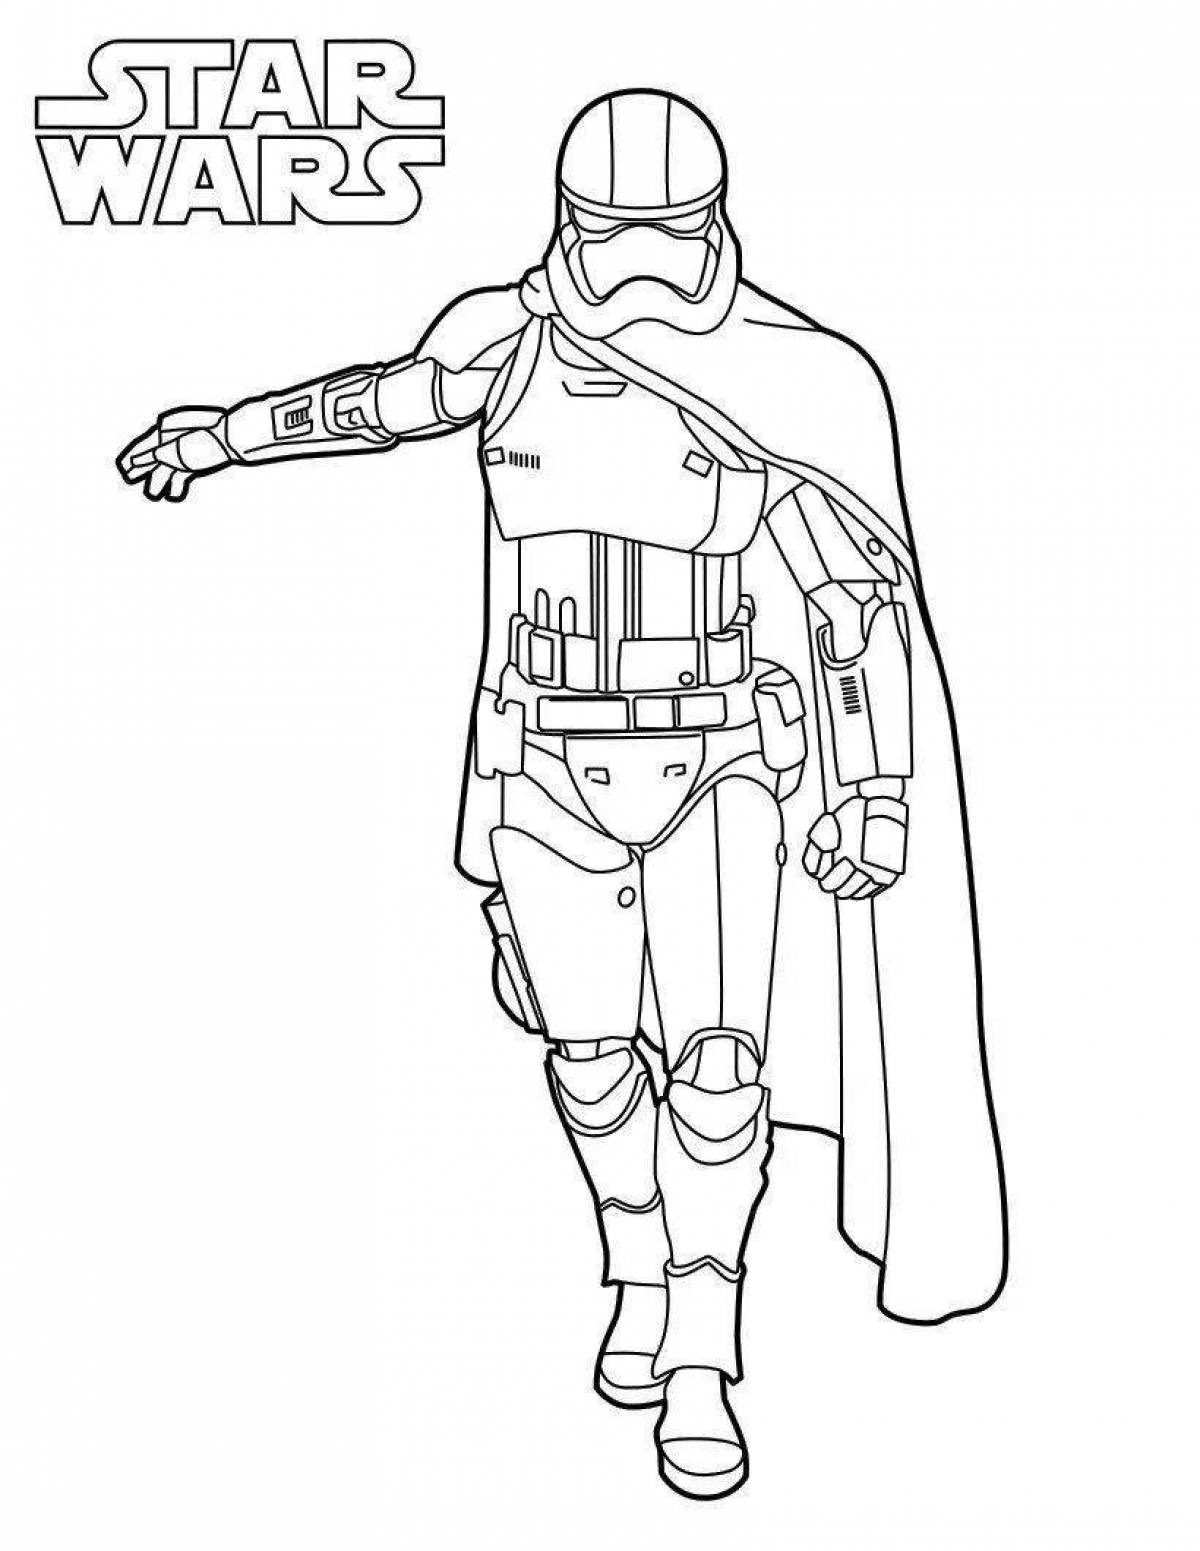 Star Wars Stormtrooper Reference Coloring Page